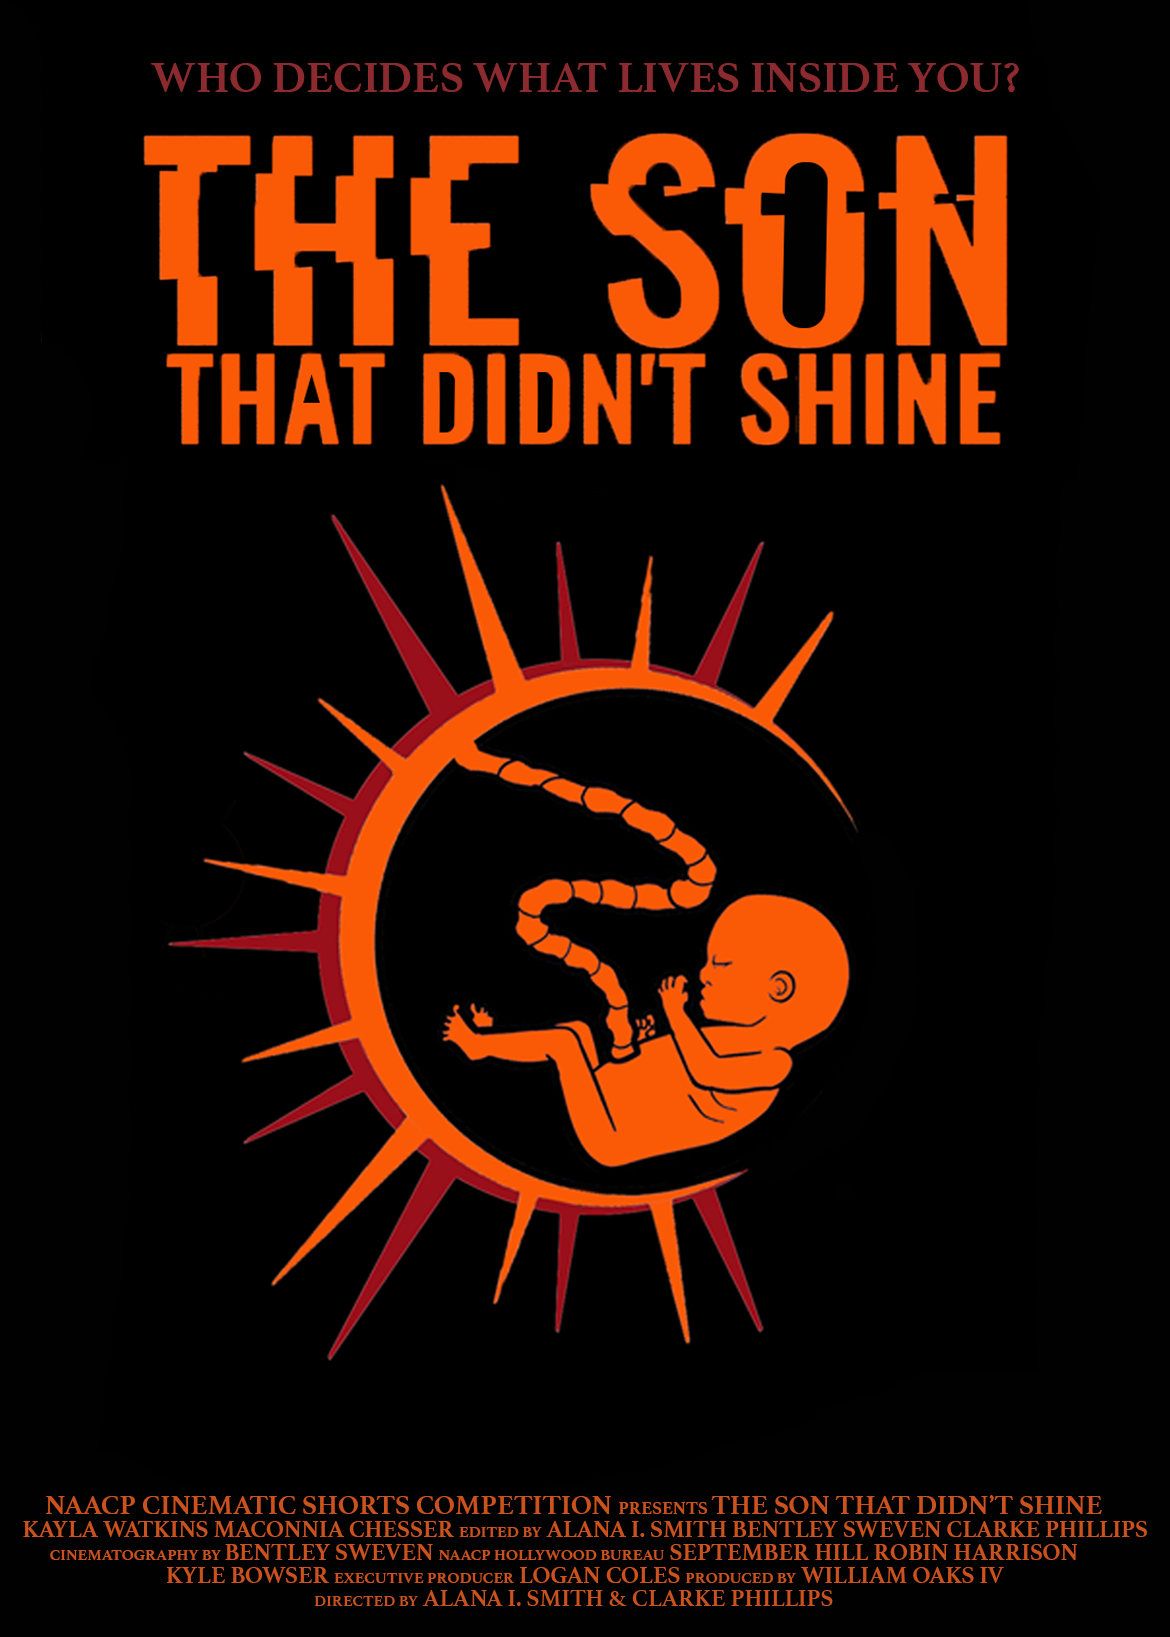 The Son That Didn't Shine - A Short Film Written And Directed By Young Filmmaker, Alana I. Smith